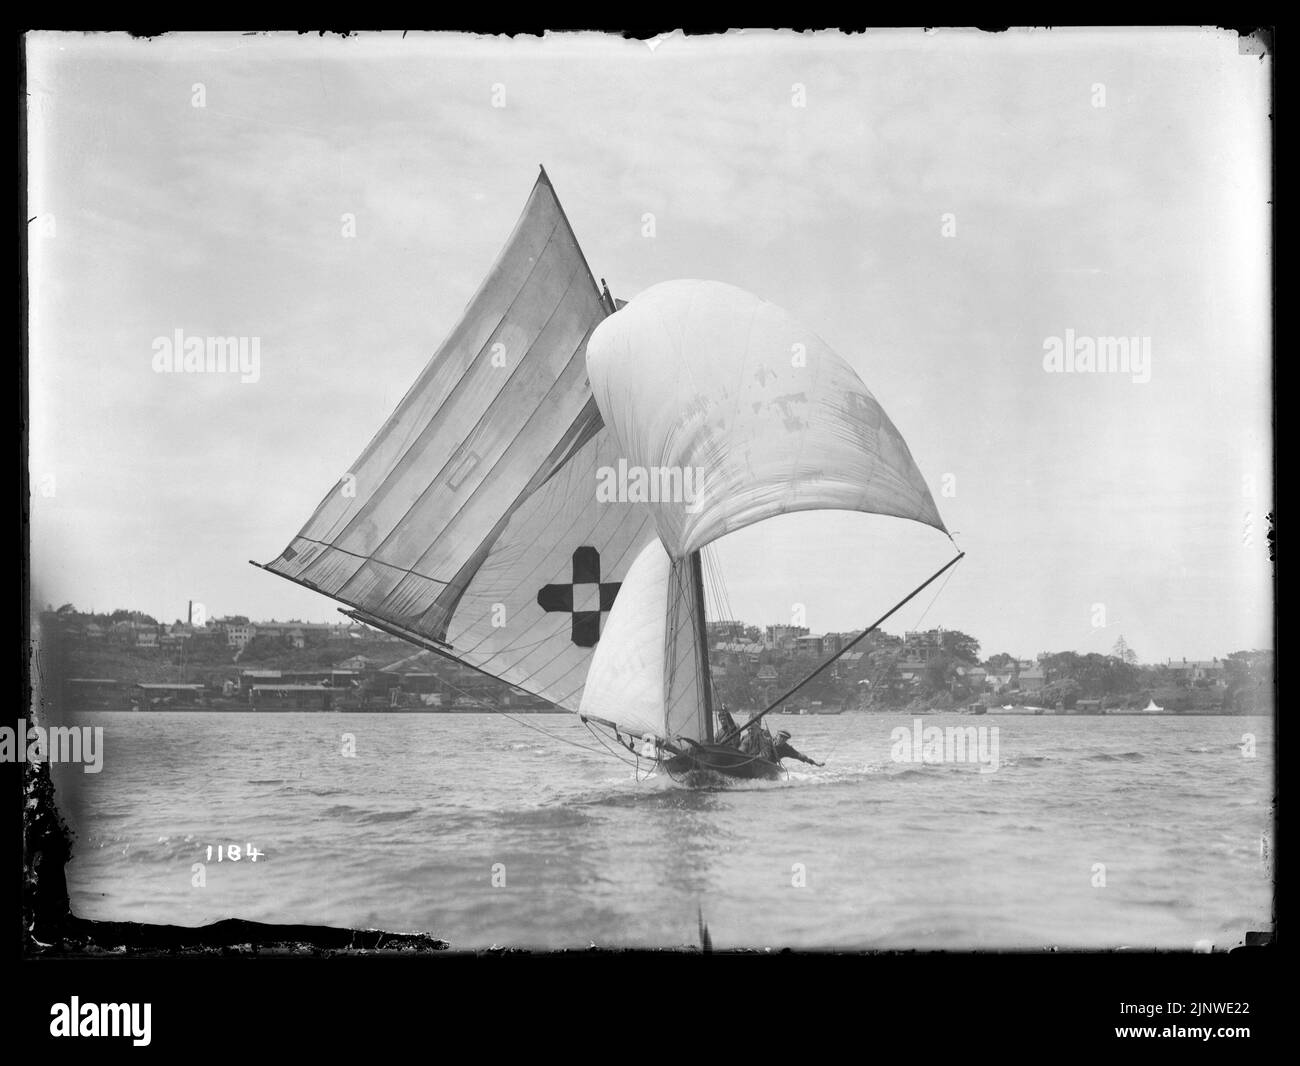 12 footer COMMONWEALTH on Sydney Harbour *** Local Caption *** Glass plate negative. Hall, William. Untitled (12 footer, has a cross with a centre square on main sail). Sydney harbour, New South Wales, Australia. Glass plate negative. Viewed from infront, flying spinnaker. Buildings visible on the land in the background. Inscription '1184' l.l. Stannard collection. Stock Photo